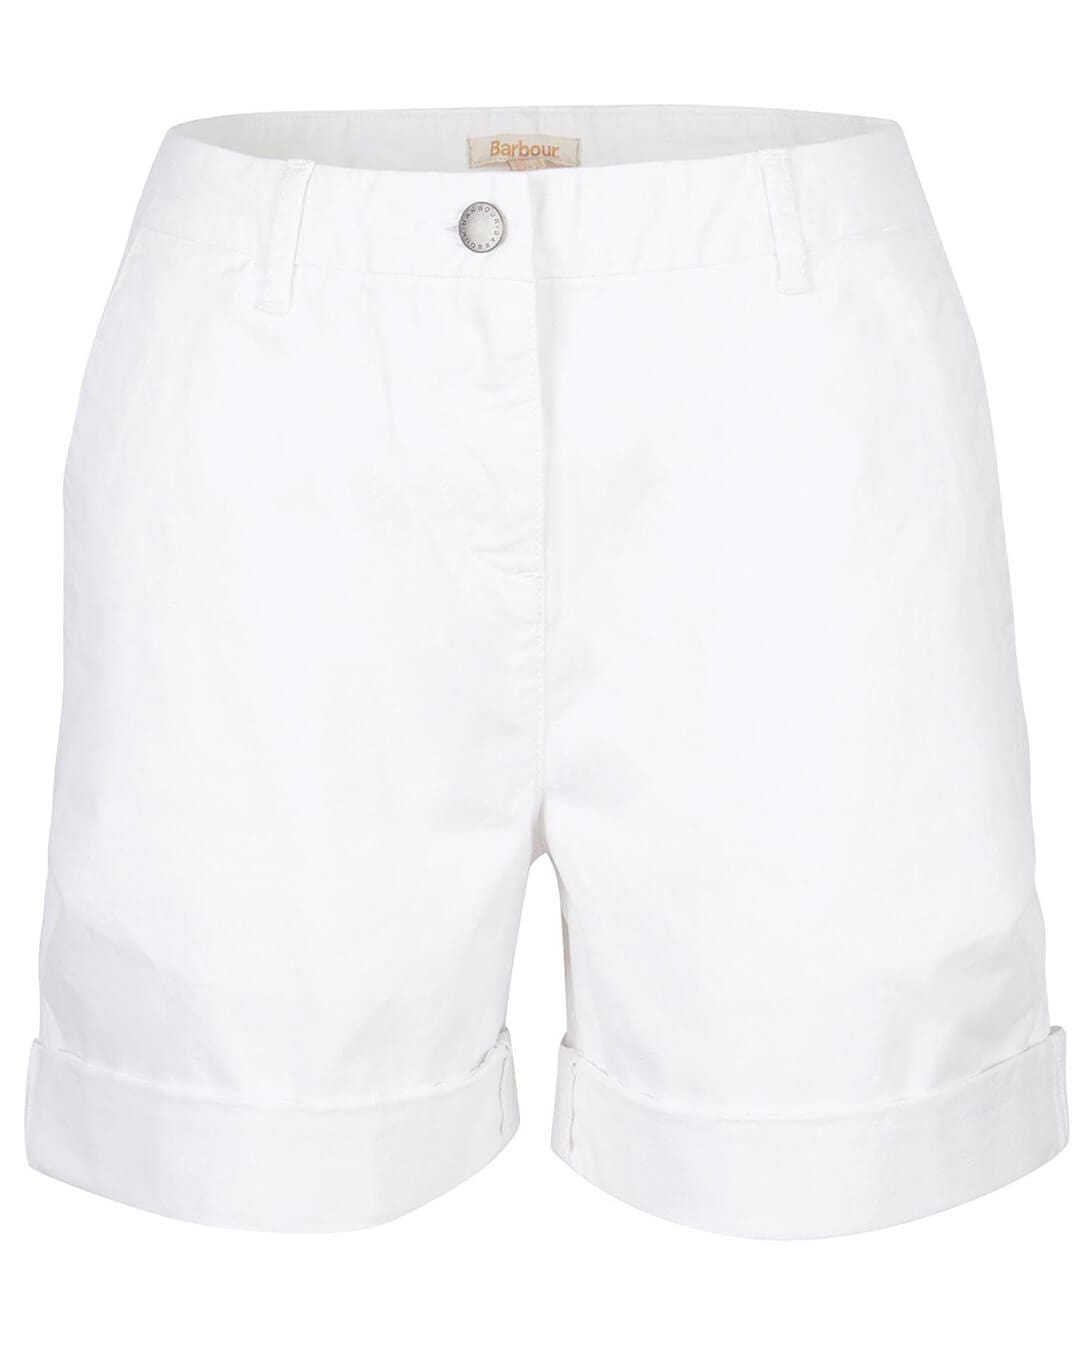 Barbour Shorts Barbour White Cotton Chino Shorts